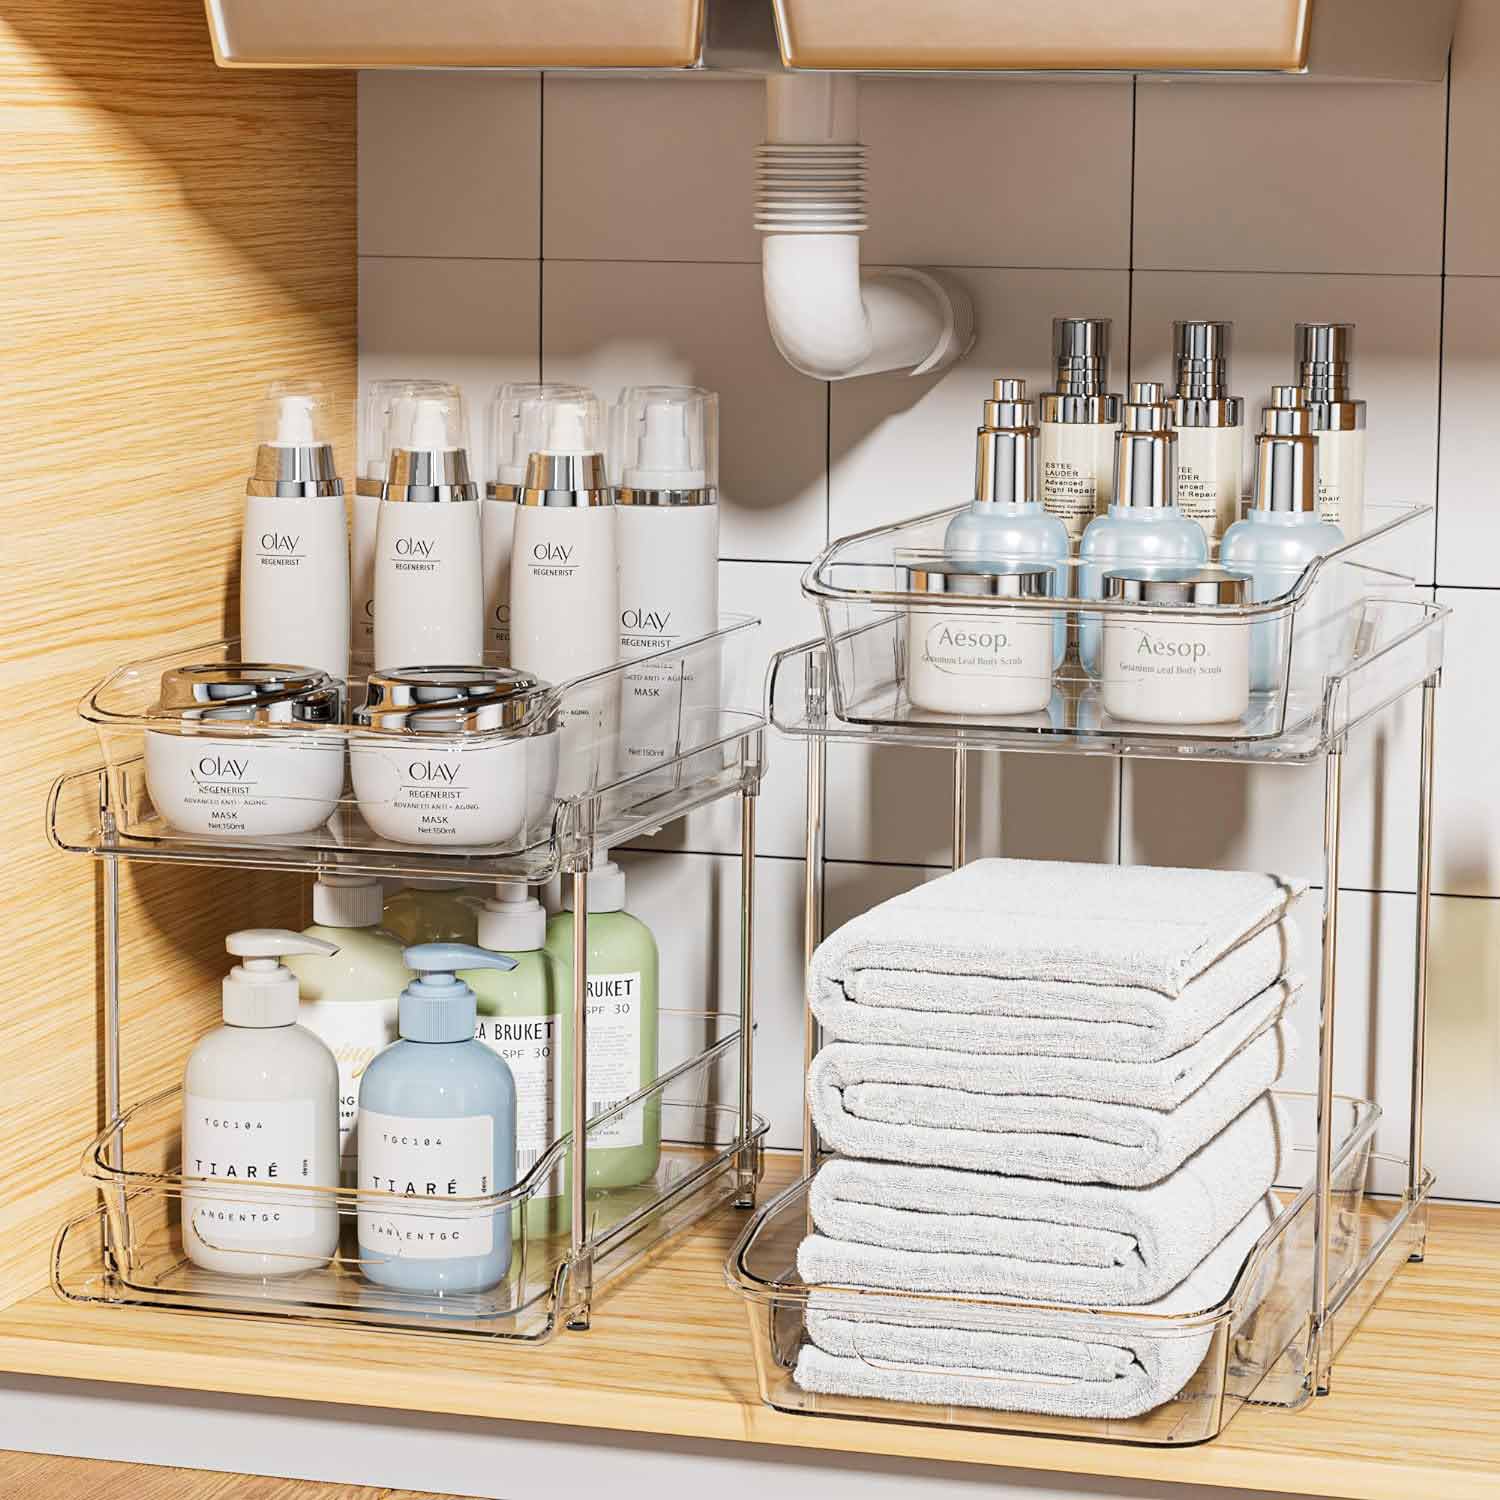 Storage under the sink with white towels and bathroom items